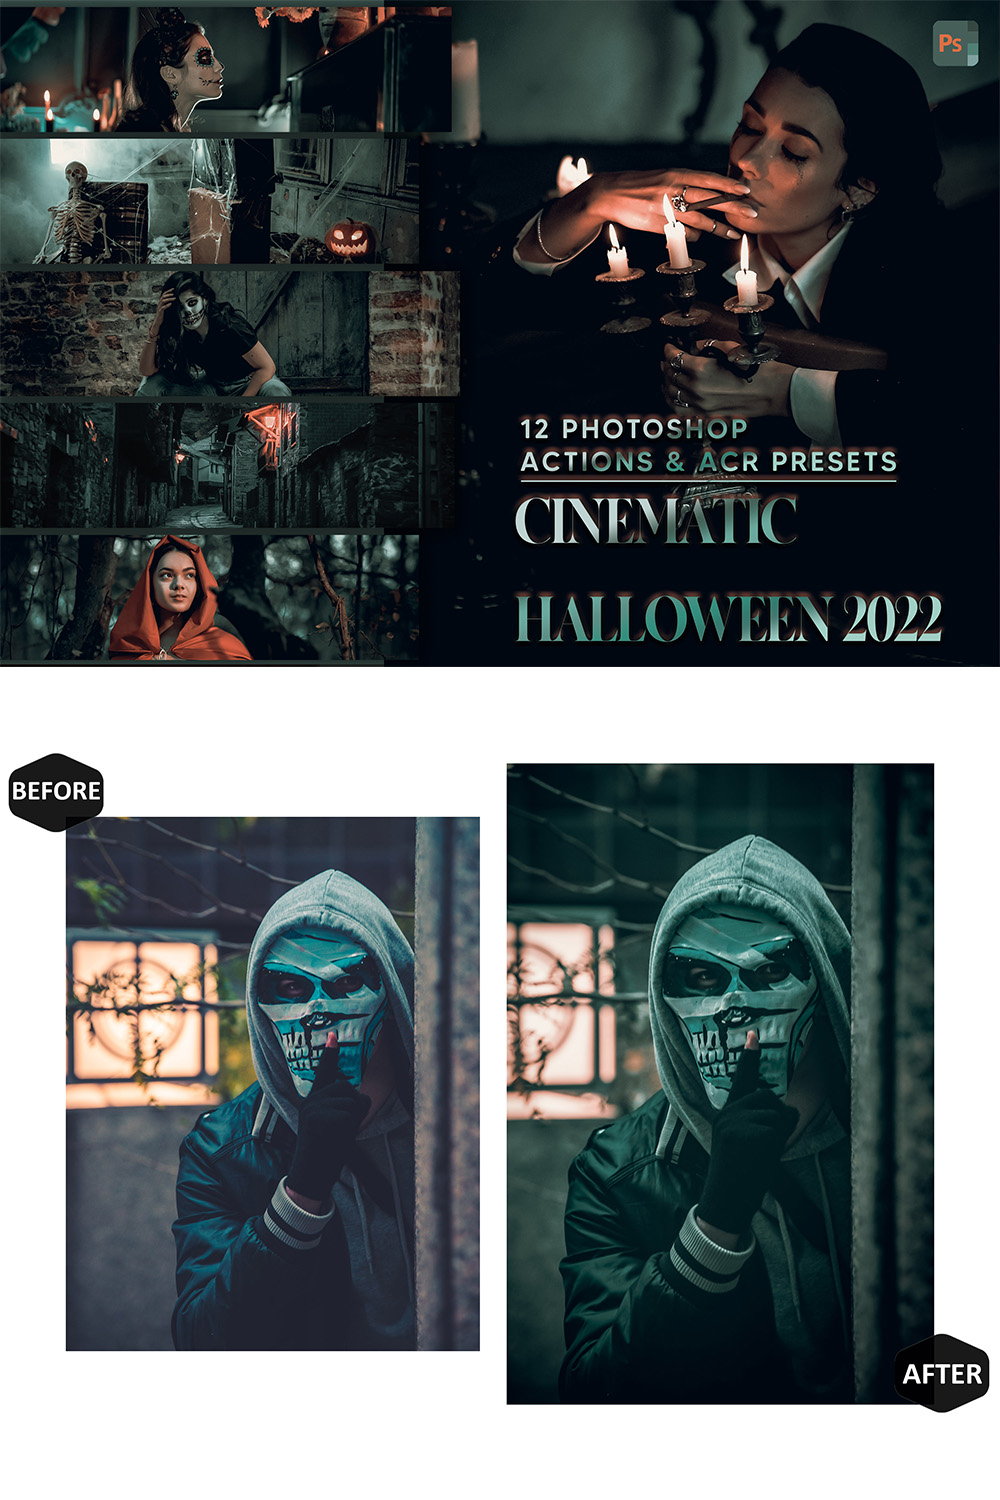 12 Photoshop Actions, Cinematic Halloween 2022 Ps Action, Film ACR Preset, Cinema Ps Filter, Atn Portrait And Lifestyle Theme For Instagram, Blogger pinterest preview image.